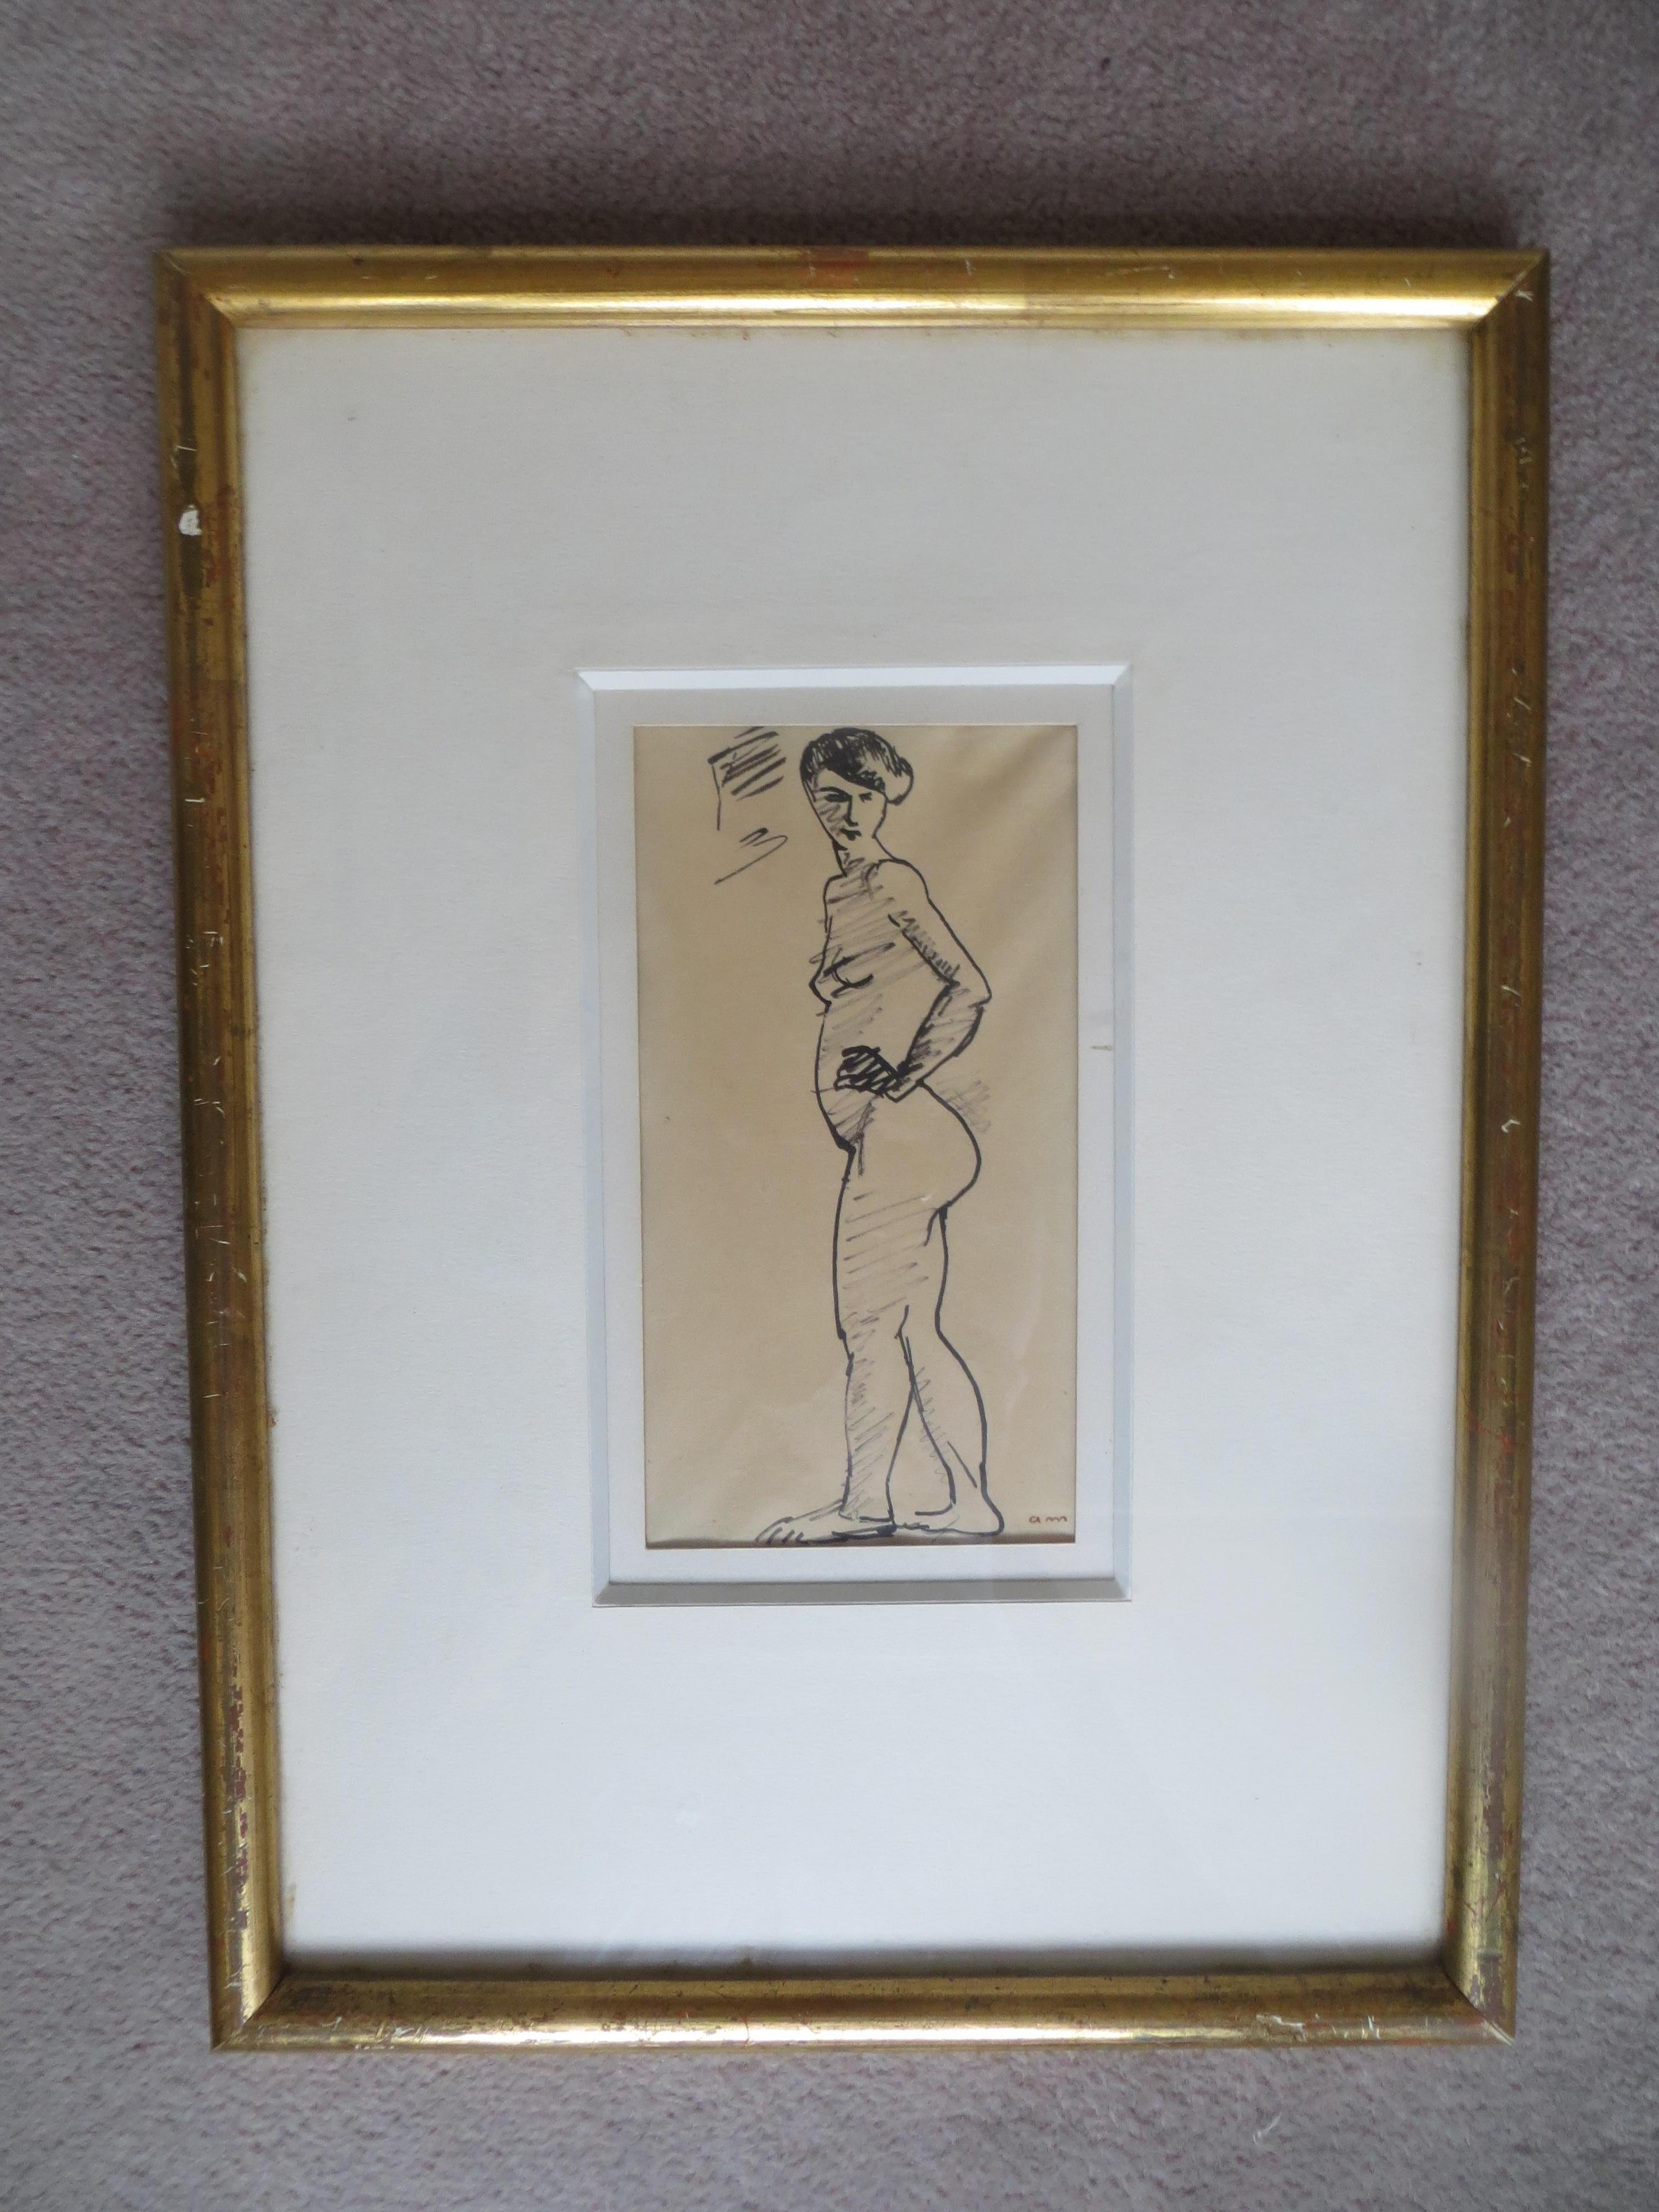 Ink drawing on paper mounted on a panel by Albert Marquet ;. He was a French painter. He initially became one of the Fauve painters and a lifelong friend of Henri Matisse. Marquet subsequently painted in a more naturalistic style, primarily